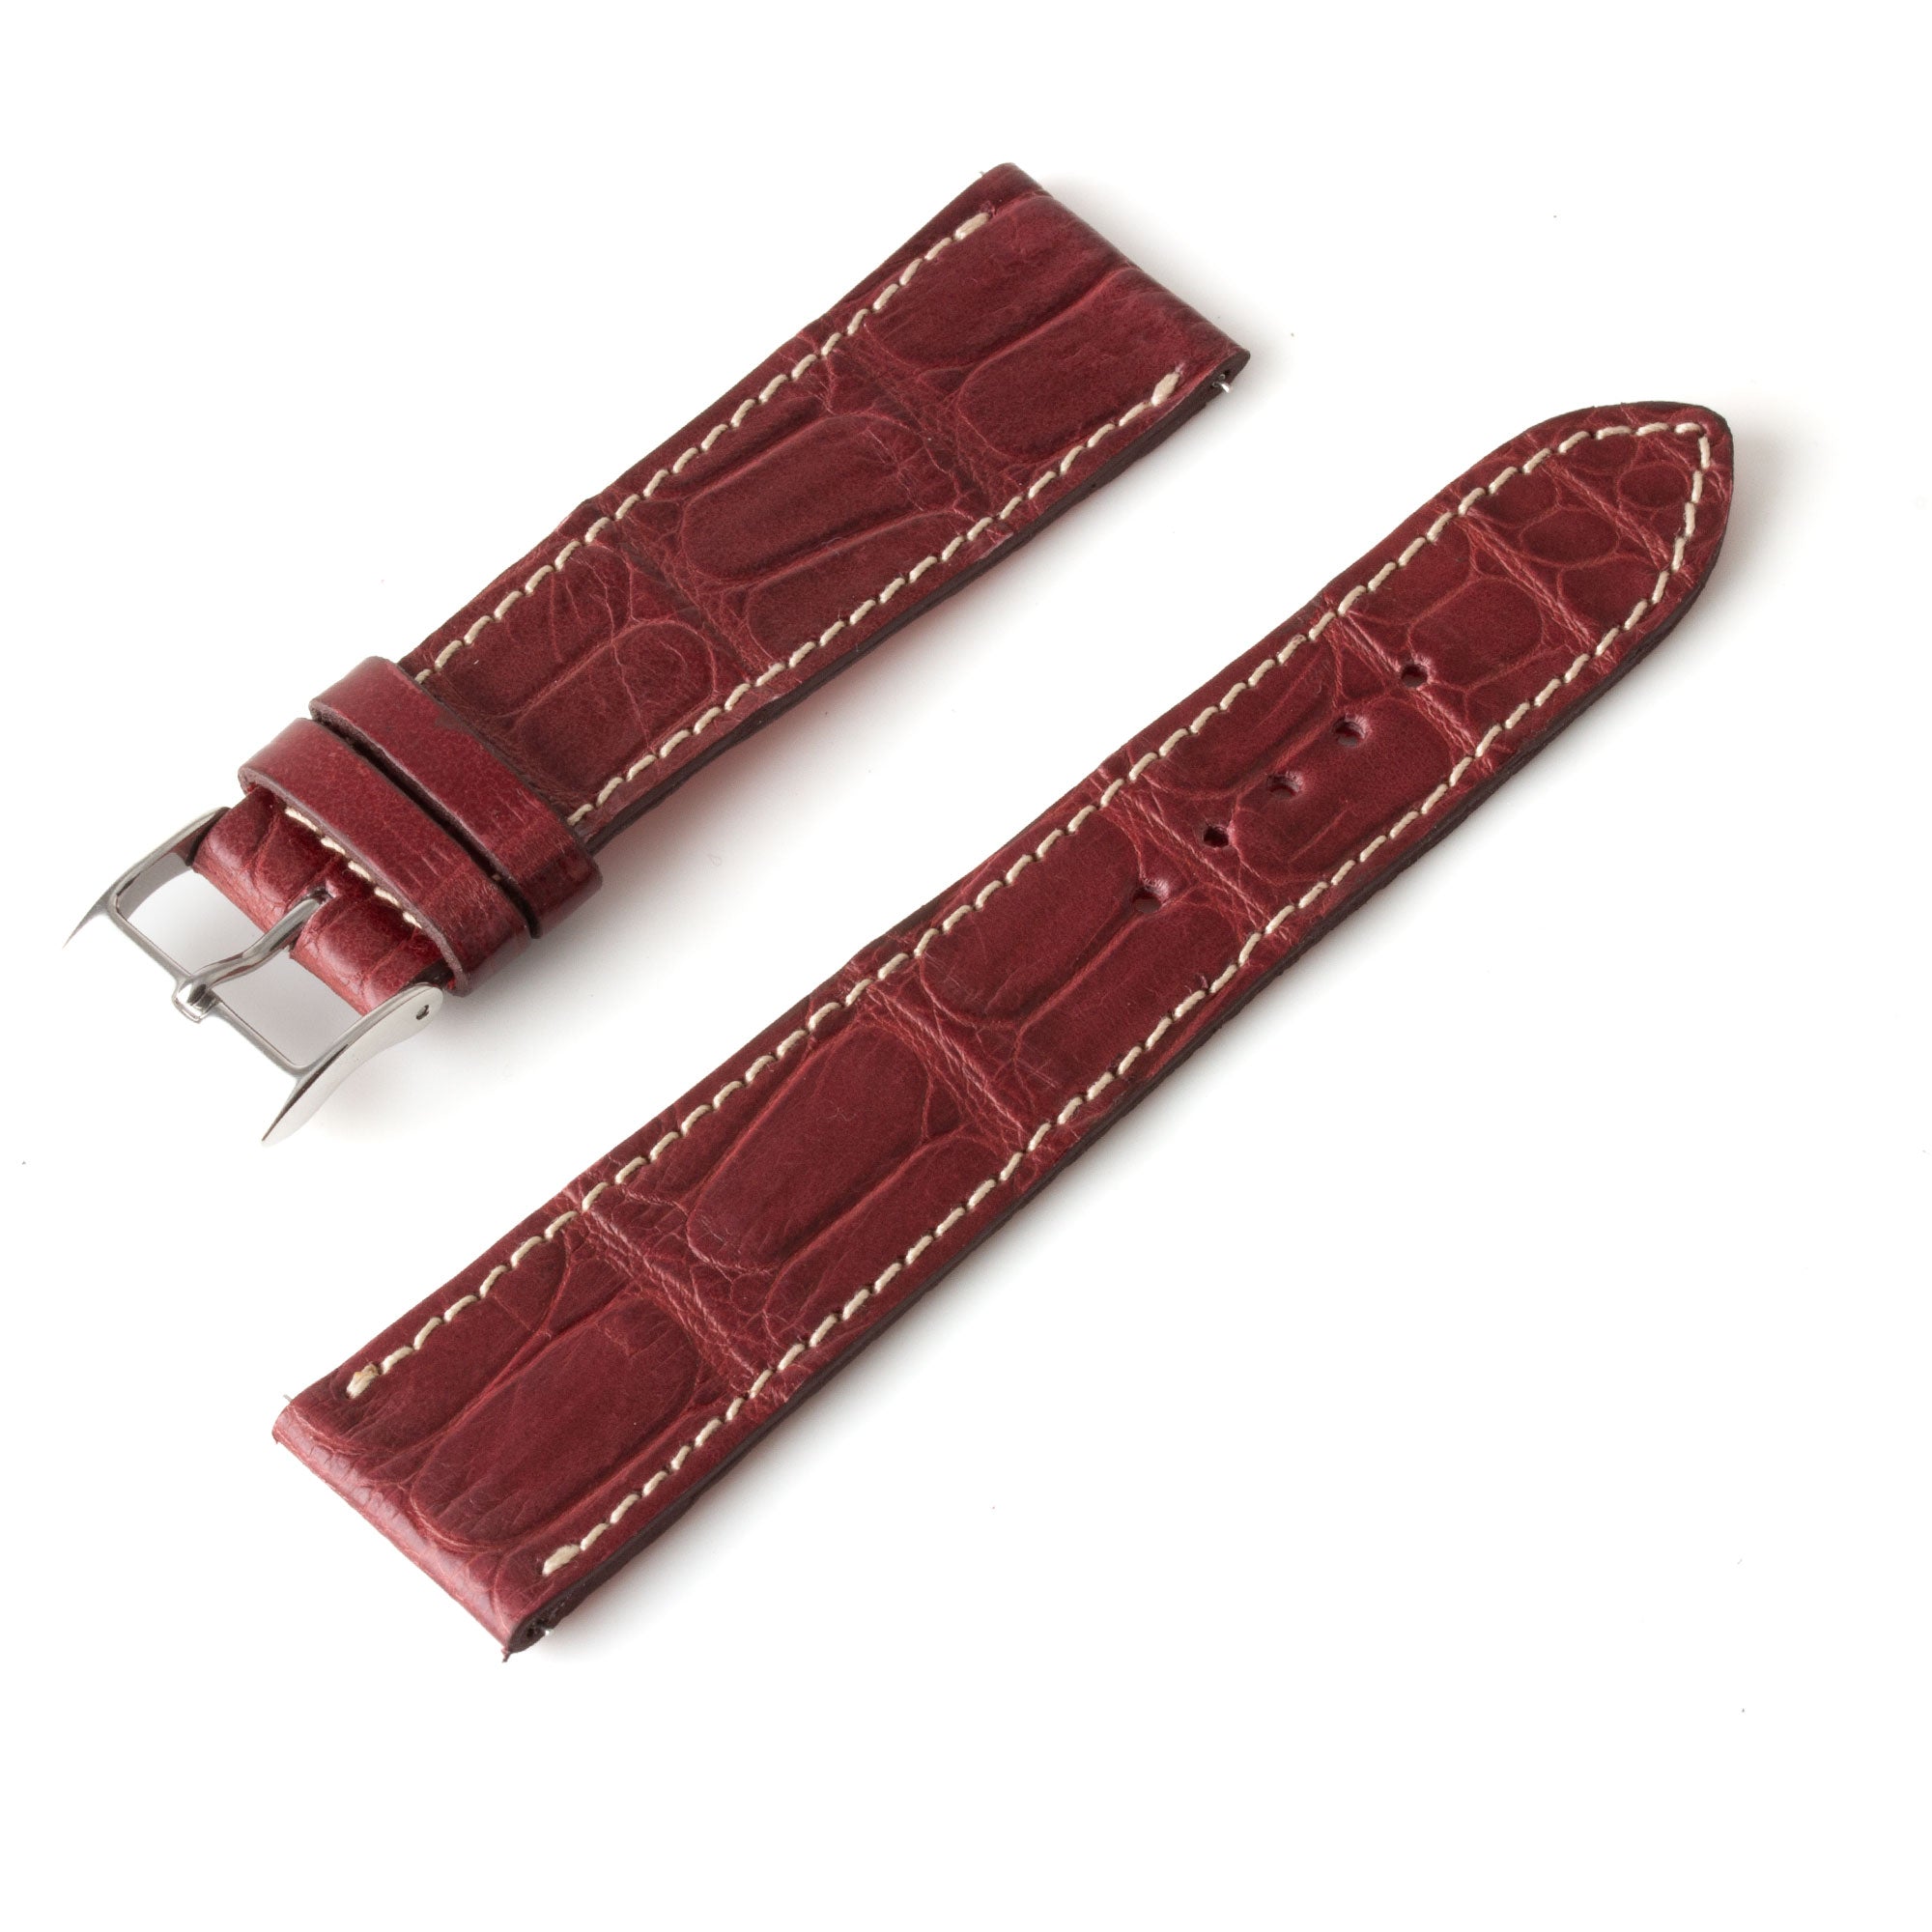 Alligator "Solo" leather watch band - 22mm width (0.87 inches) / Size M (n° 6)